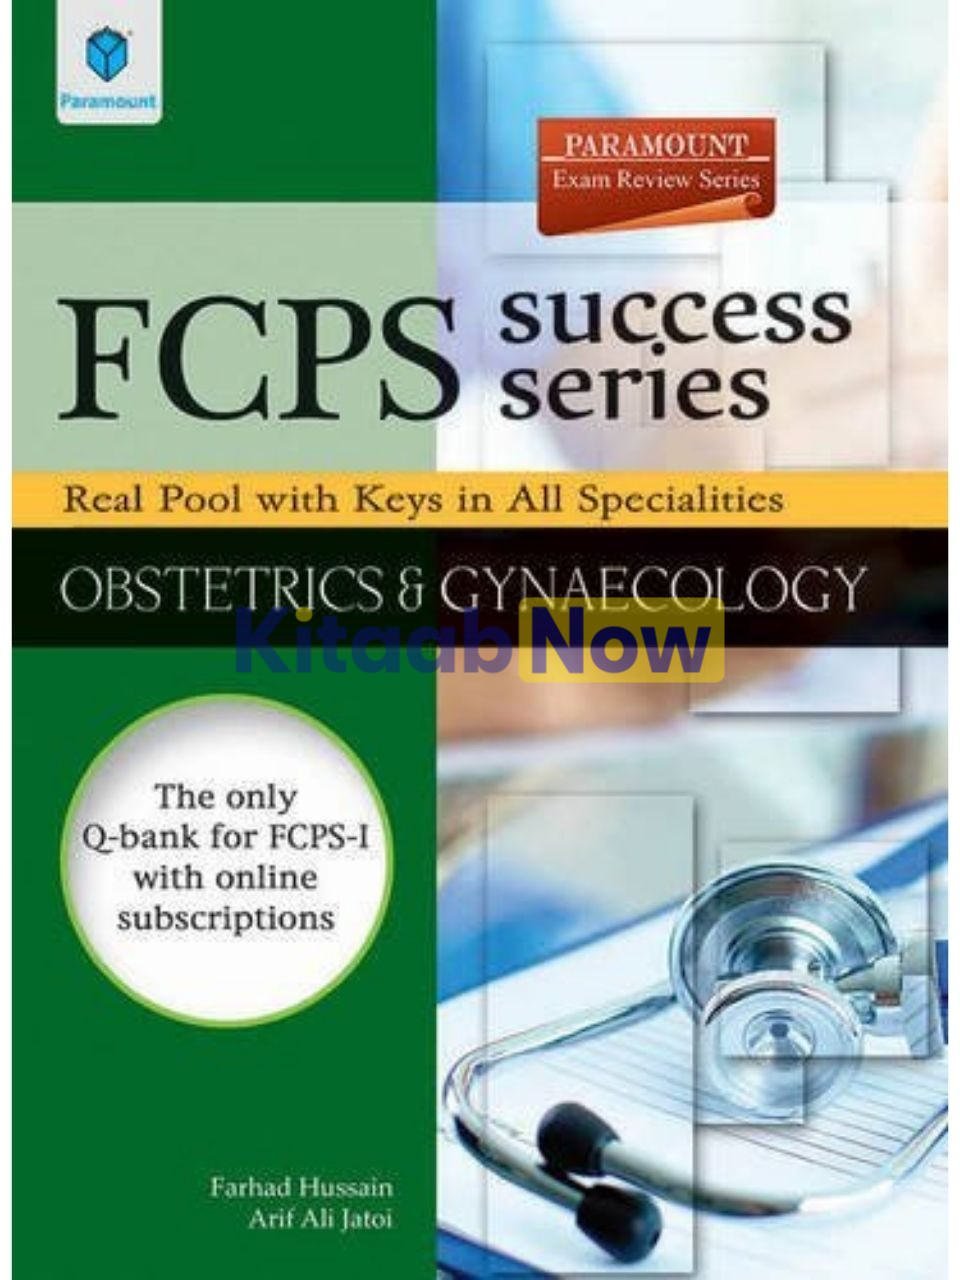 FCPS-SUCCESS-SERIES-REAL-POOL-WITH-KEYS-IN-ALL-SPECIALITIES-OBSTETRICS-GYNAECOLOGY-pb-2016.jpg